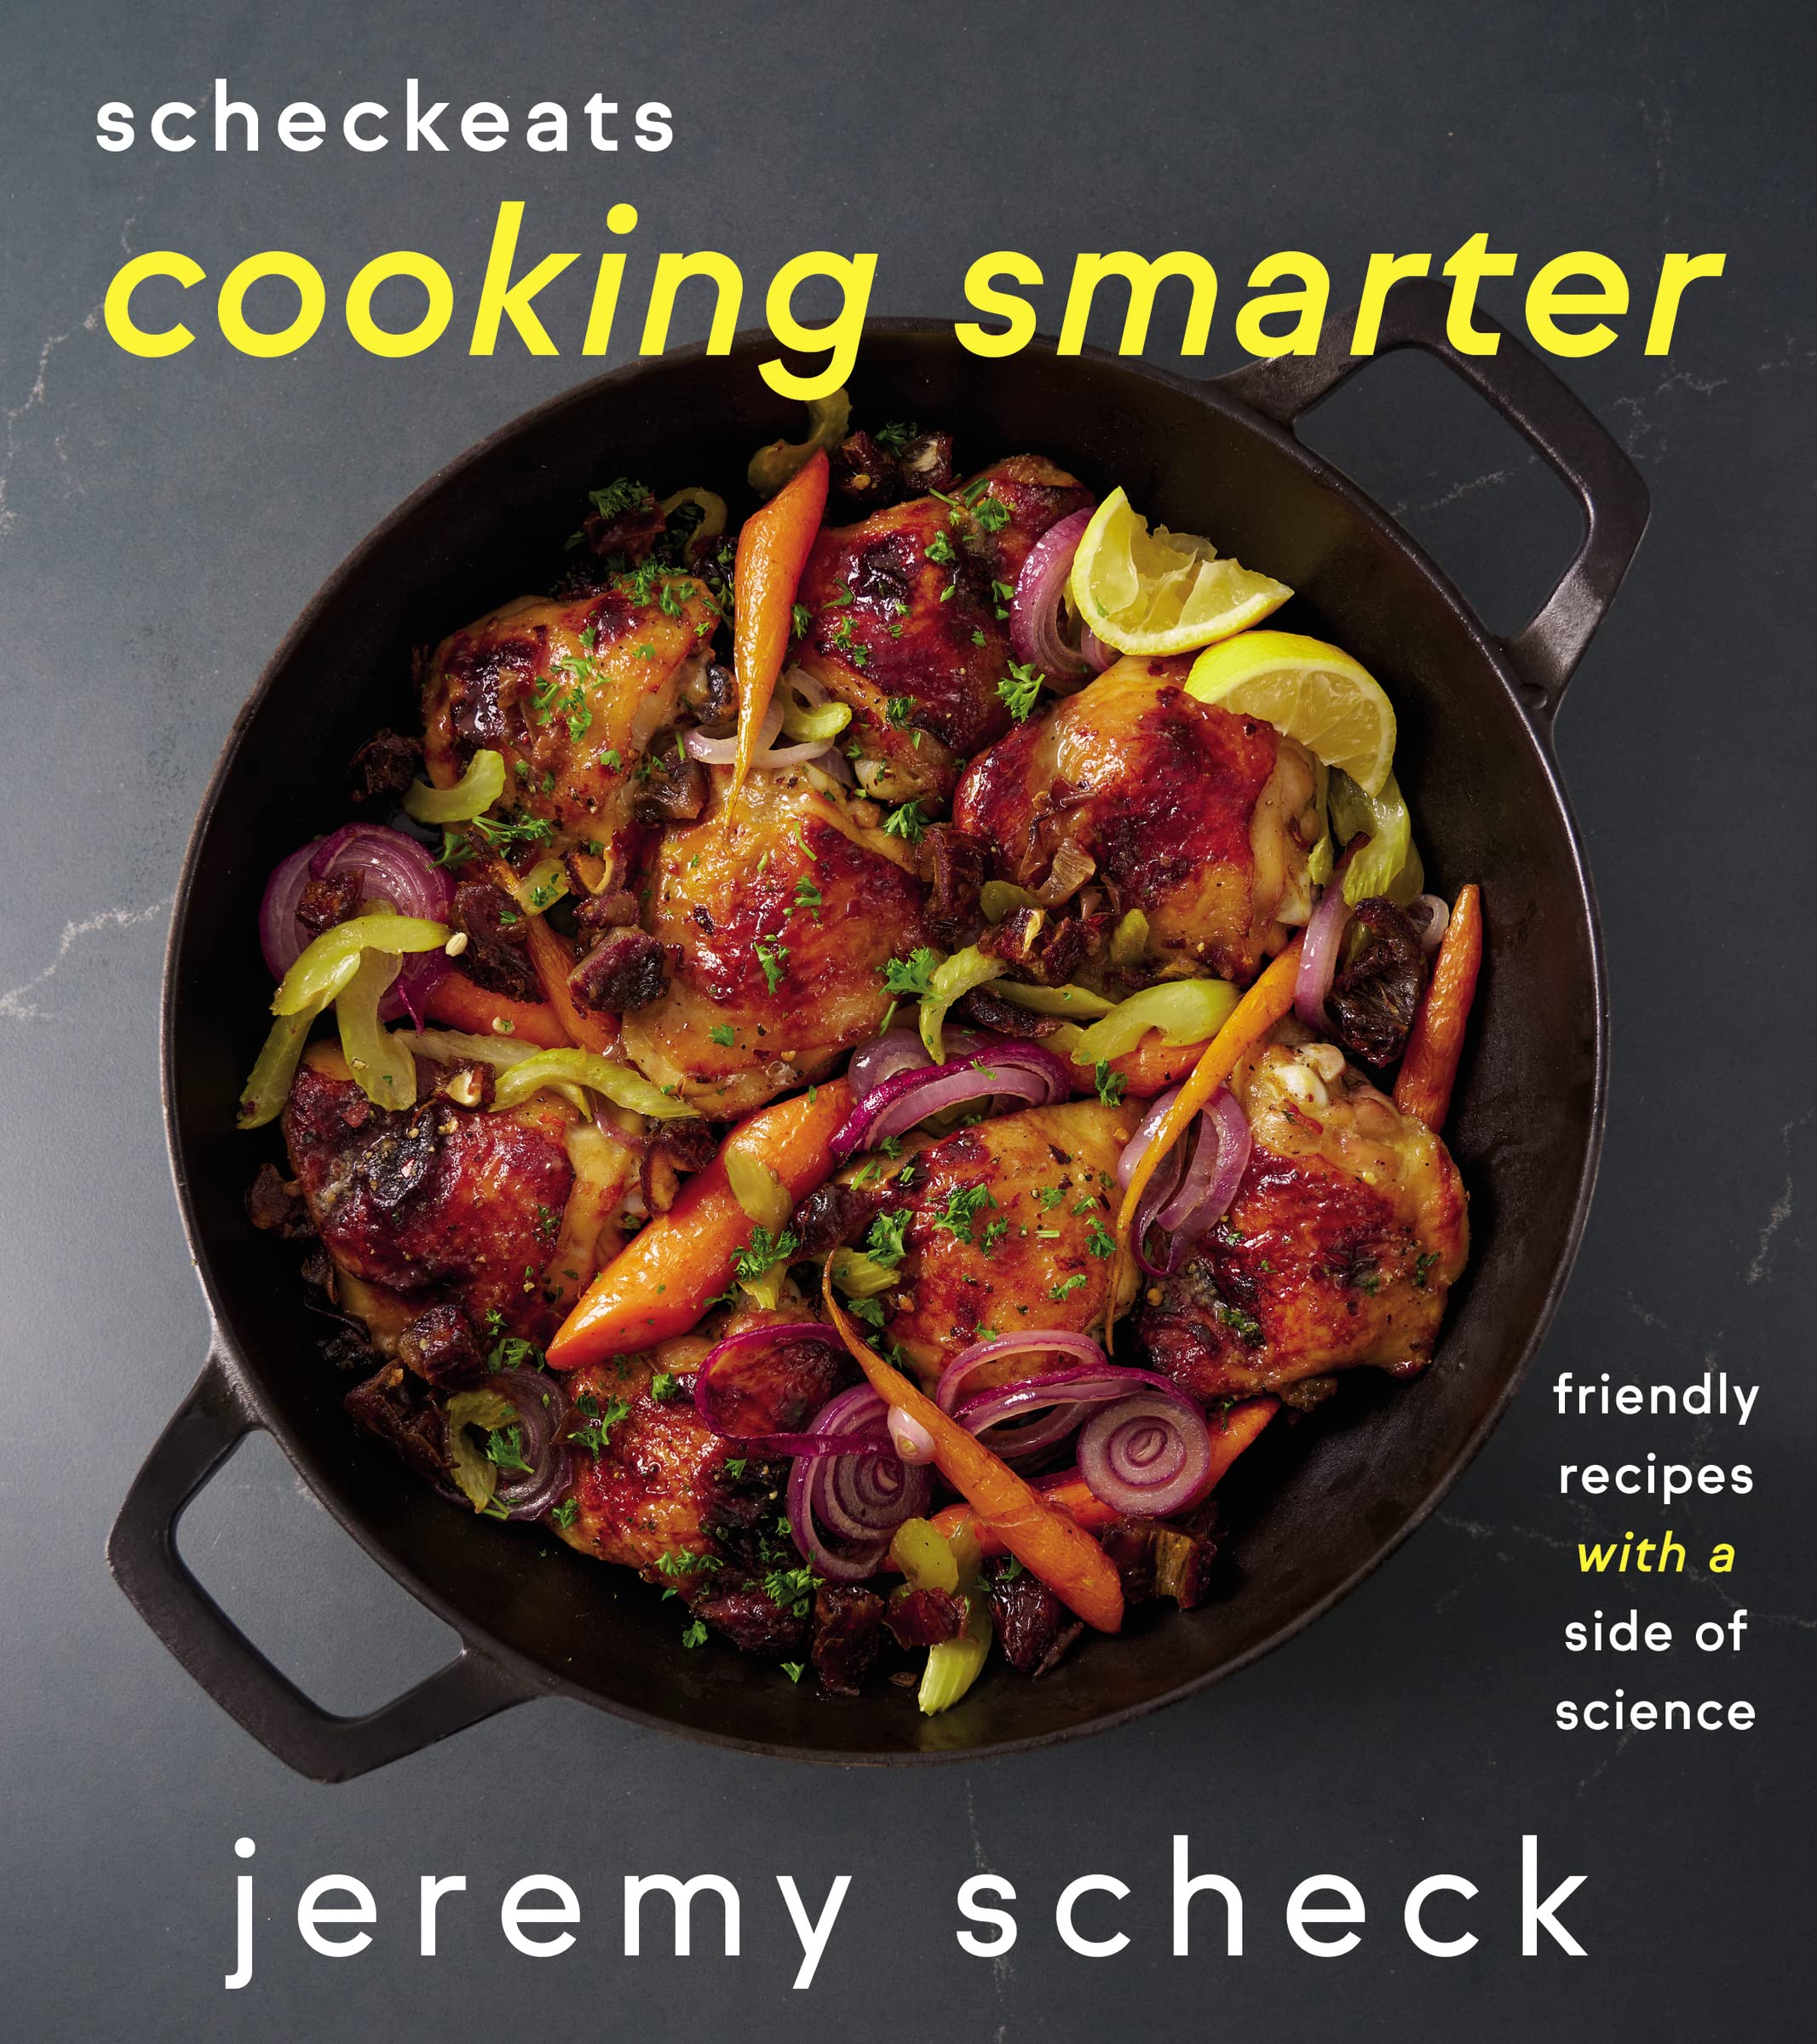 ScheckEats ― Cooking Smarter: Friendly Recipes with a Side of Science (Jeremy Scheck) *Signed*